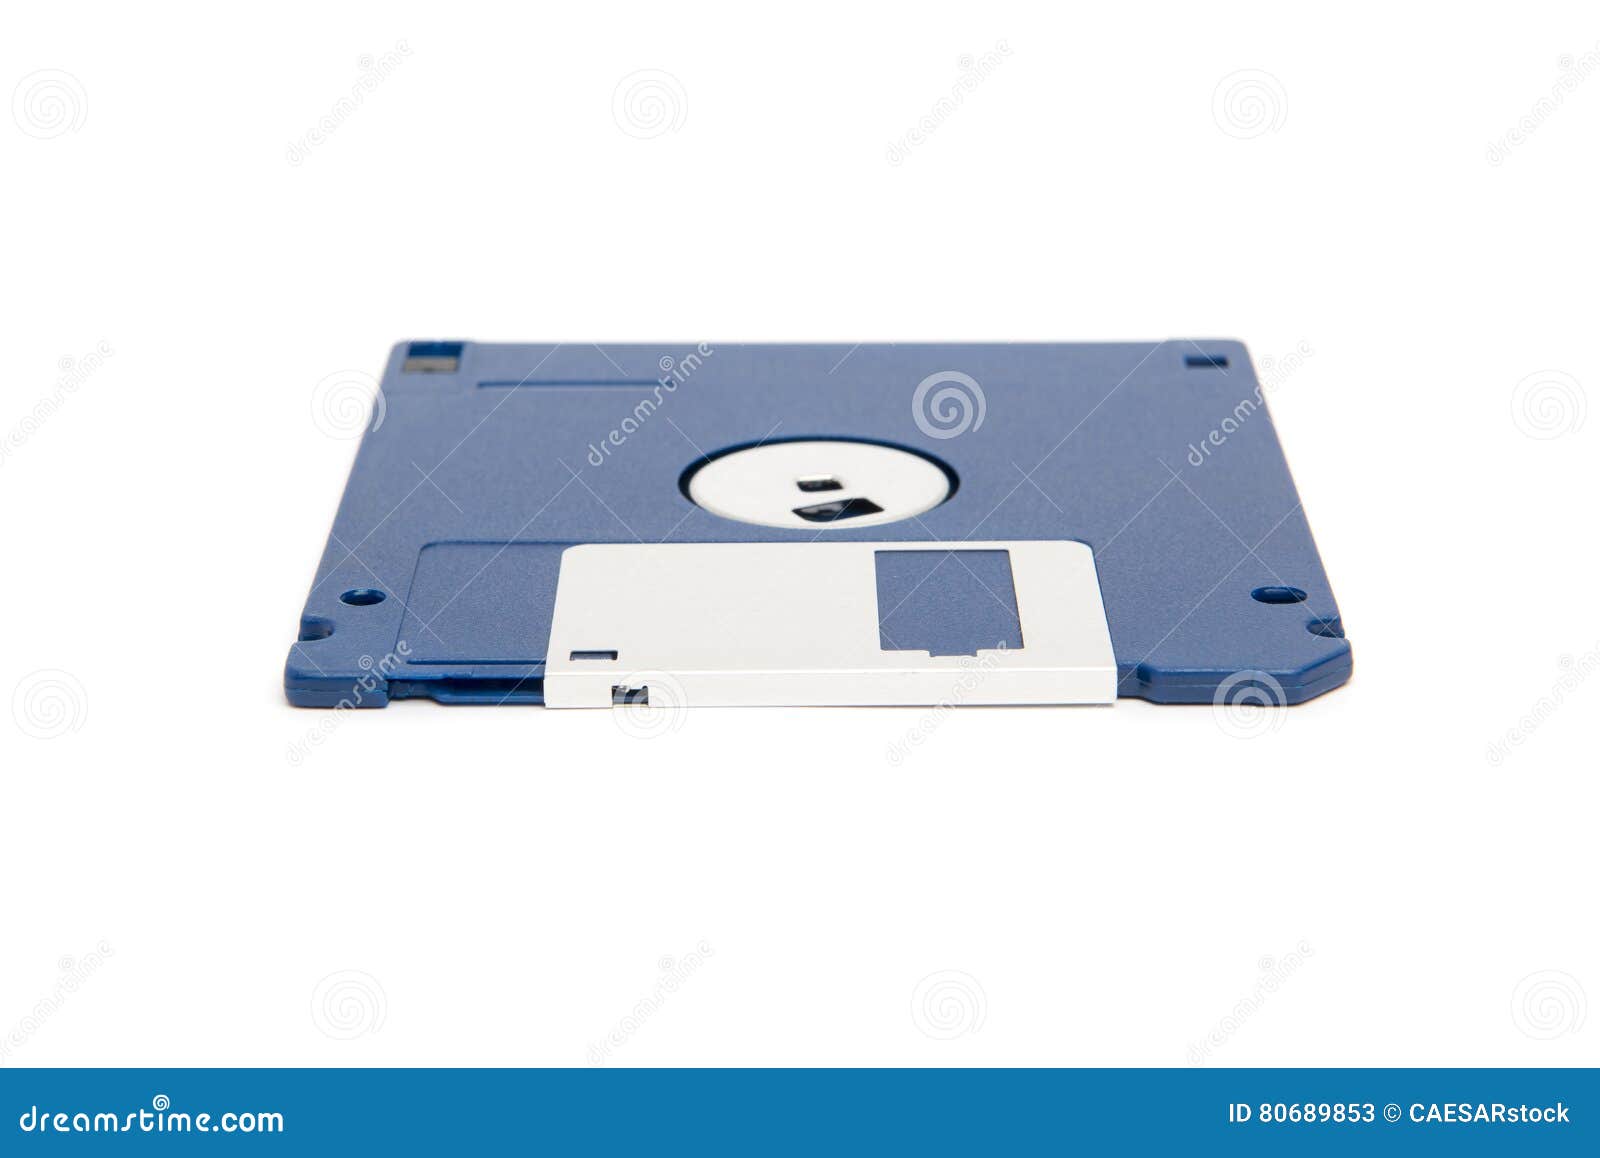 blue and silver floppy disk